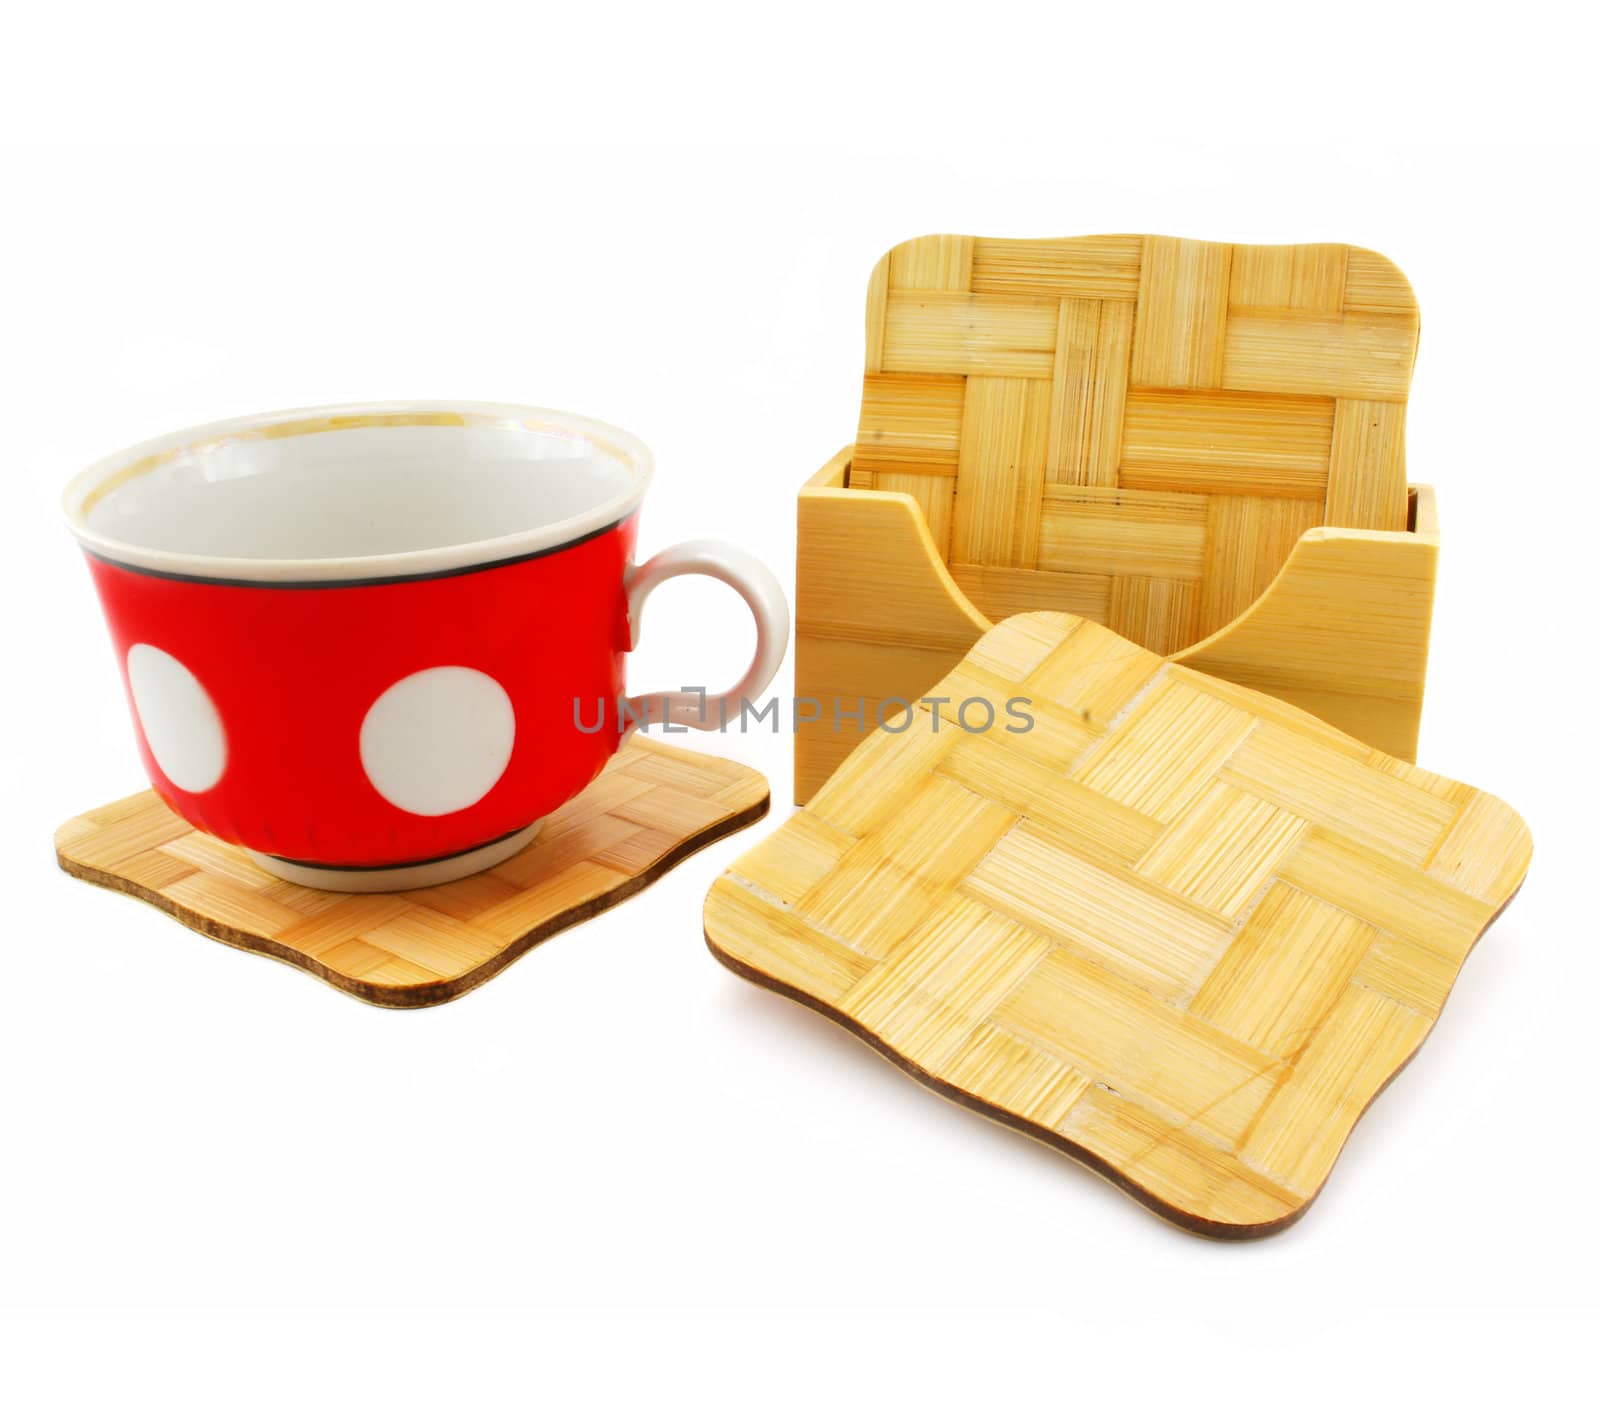 Colored cup and set of wooden trivets by alphacell